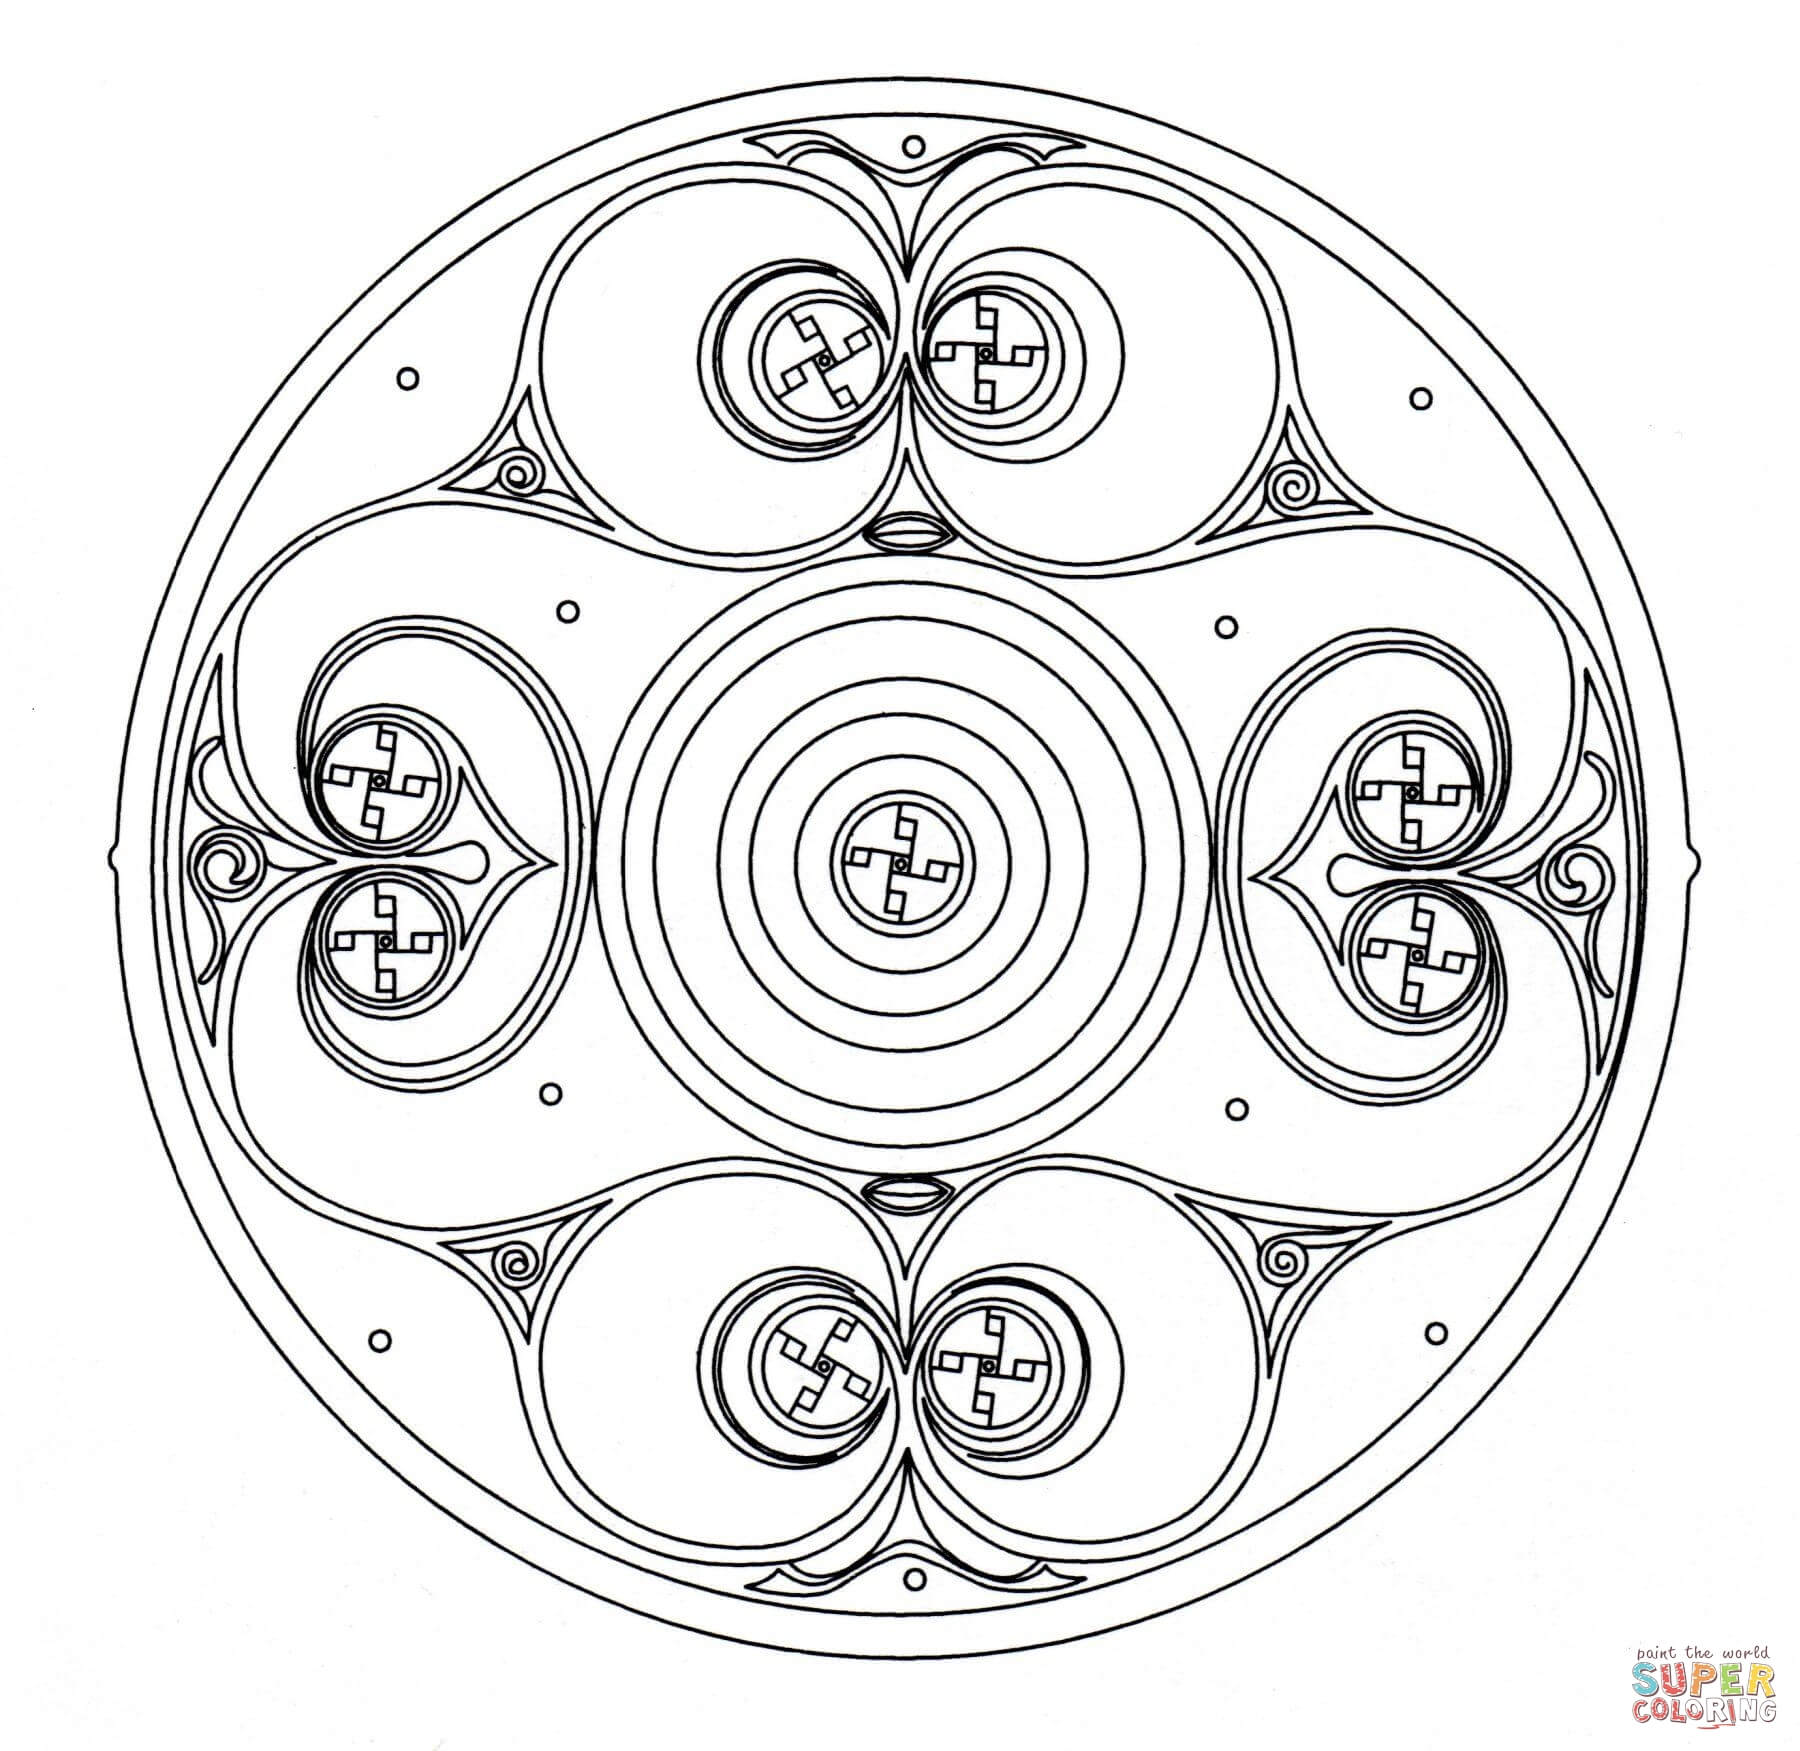 Celtic art coloring pages | Free Coloring Pages